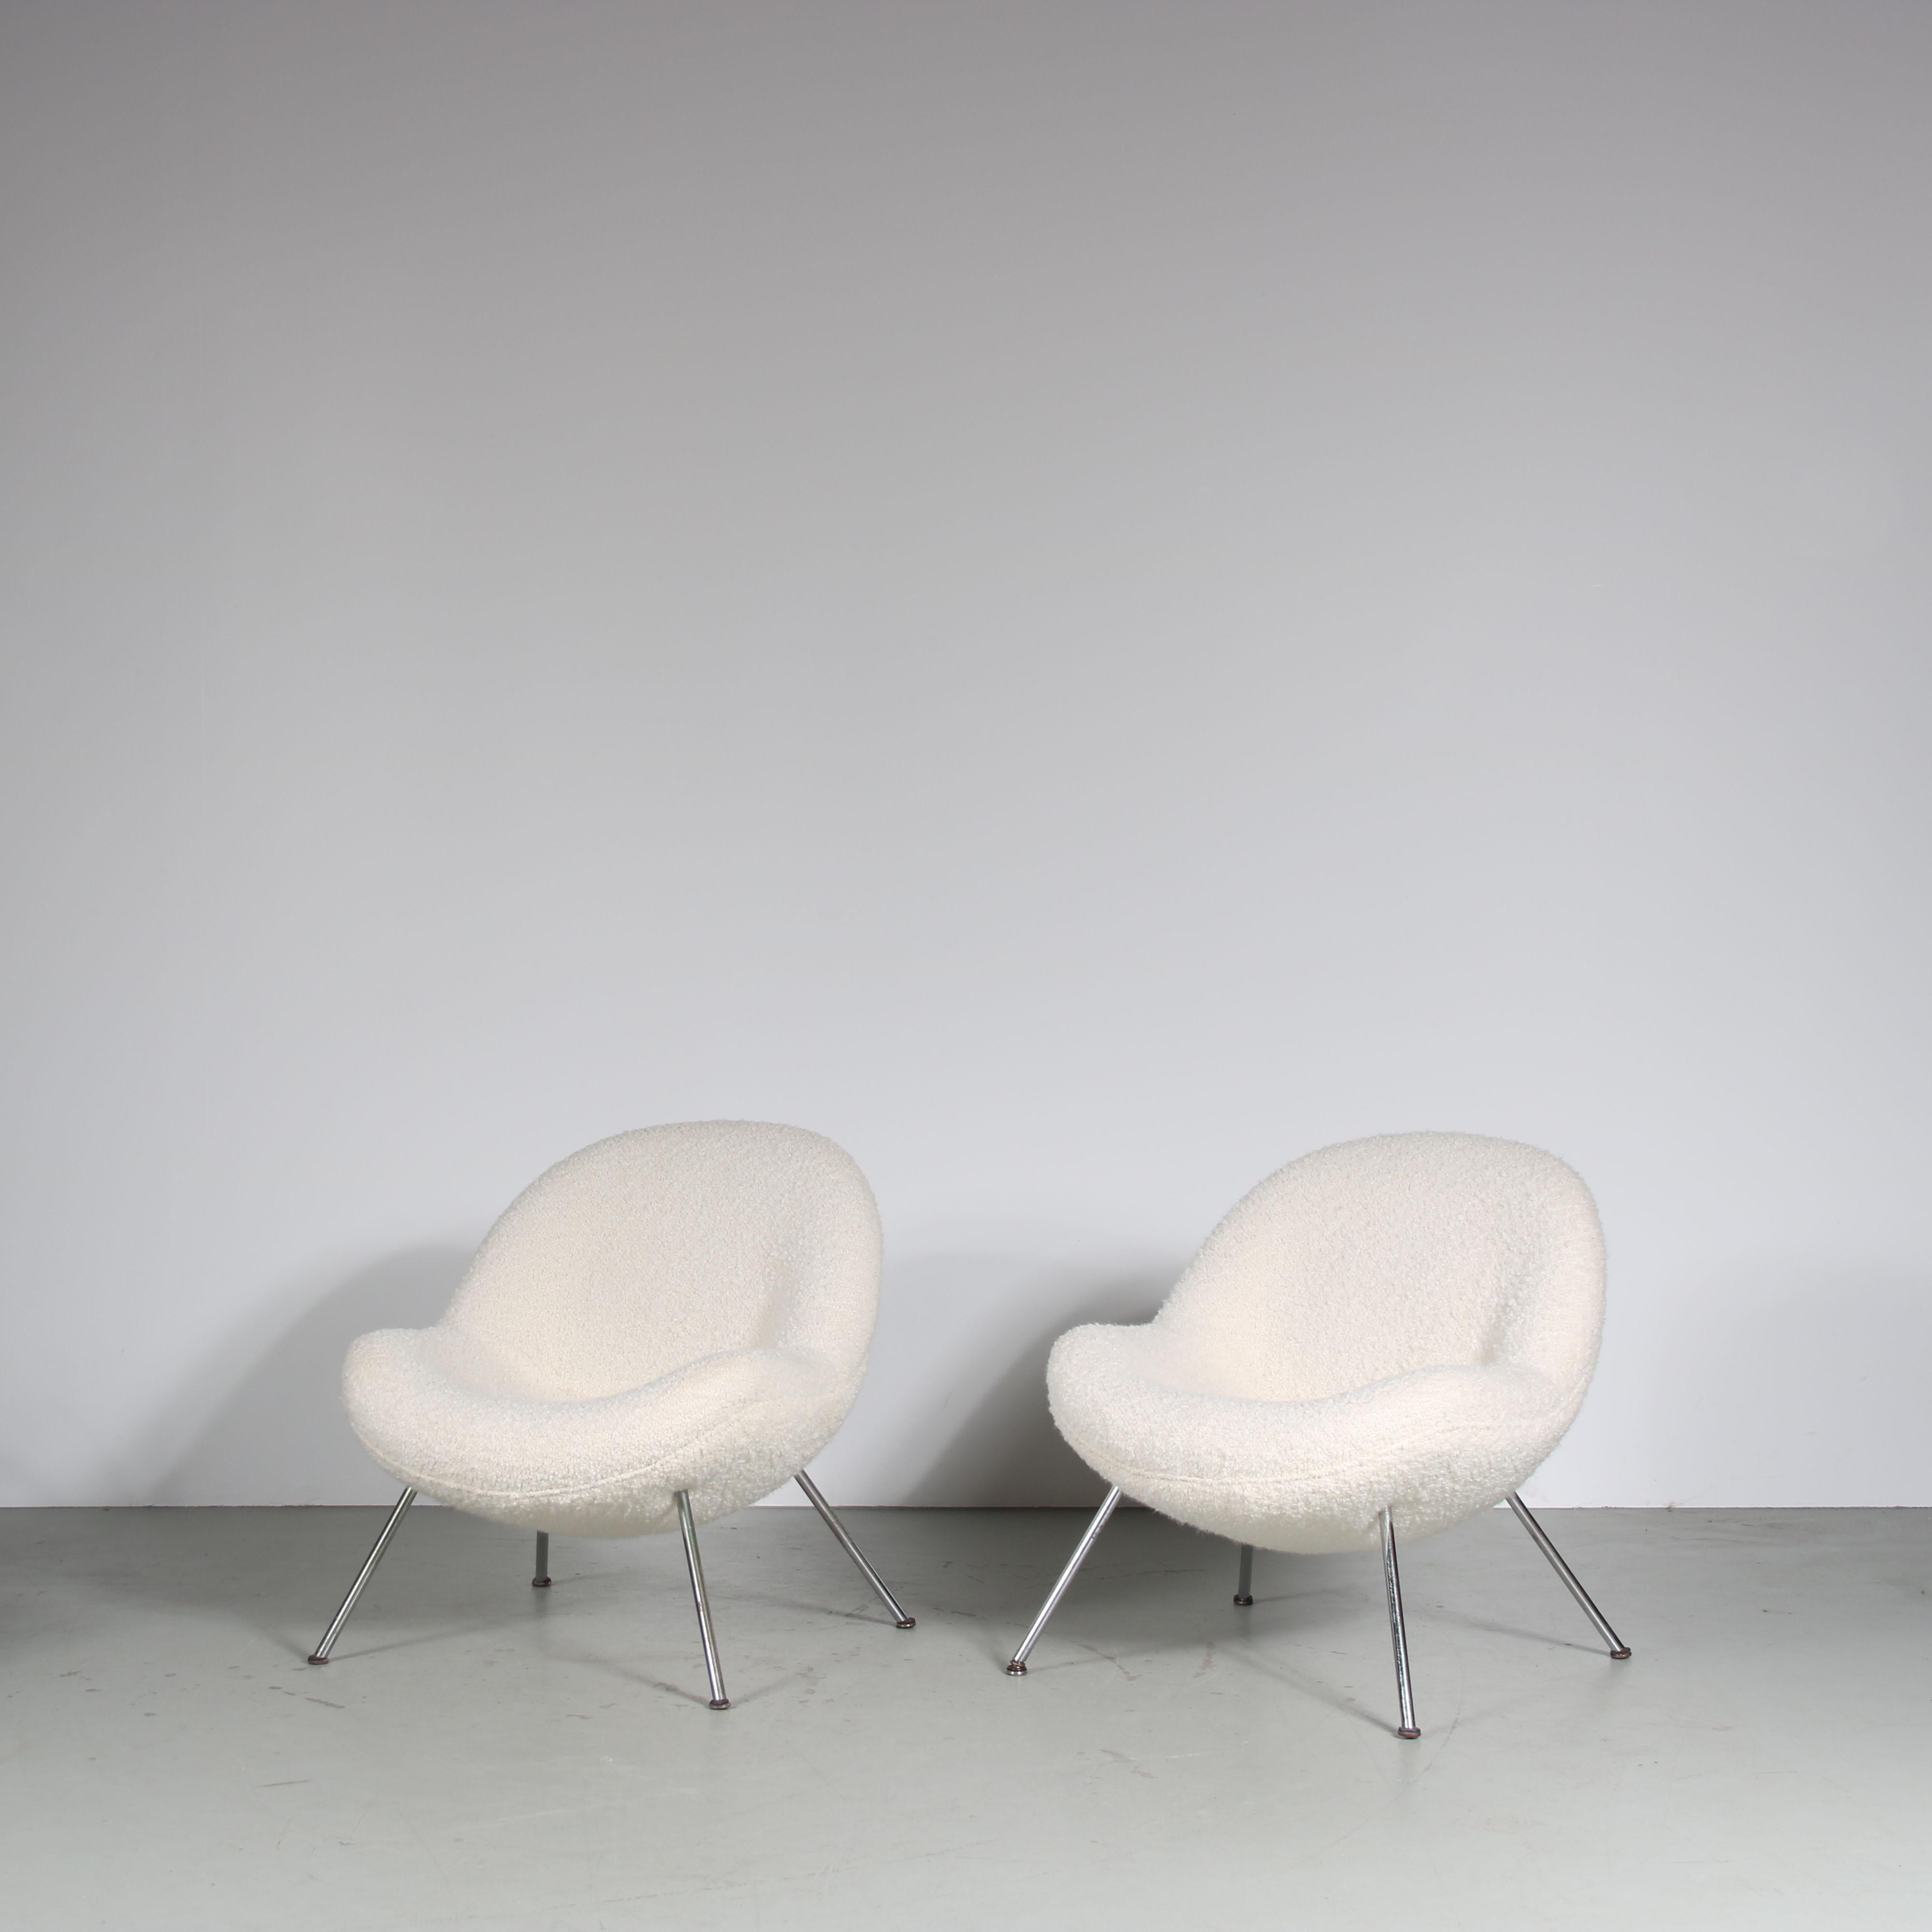 Mid-20th Century Fritz Neth “Egg” Chairs for Correcta, Germany 1950 For Sale